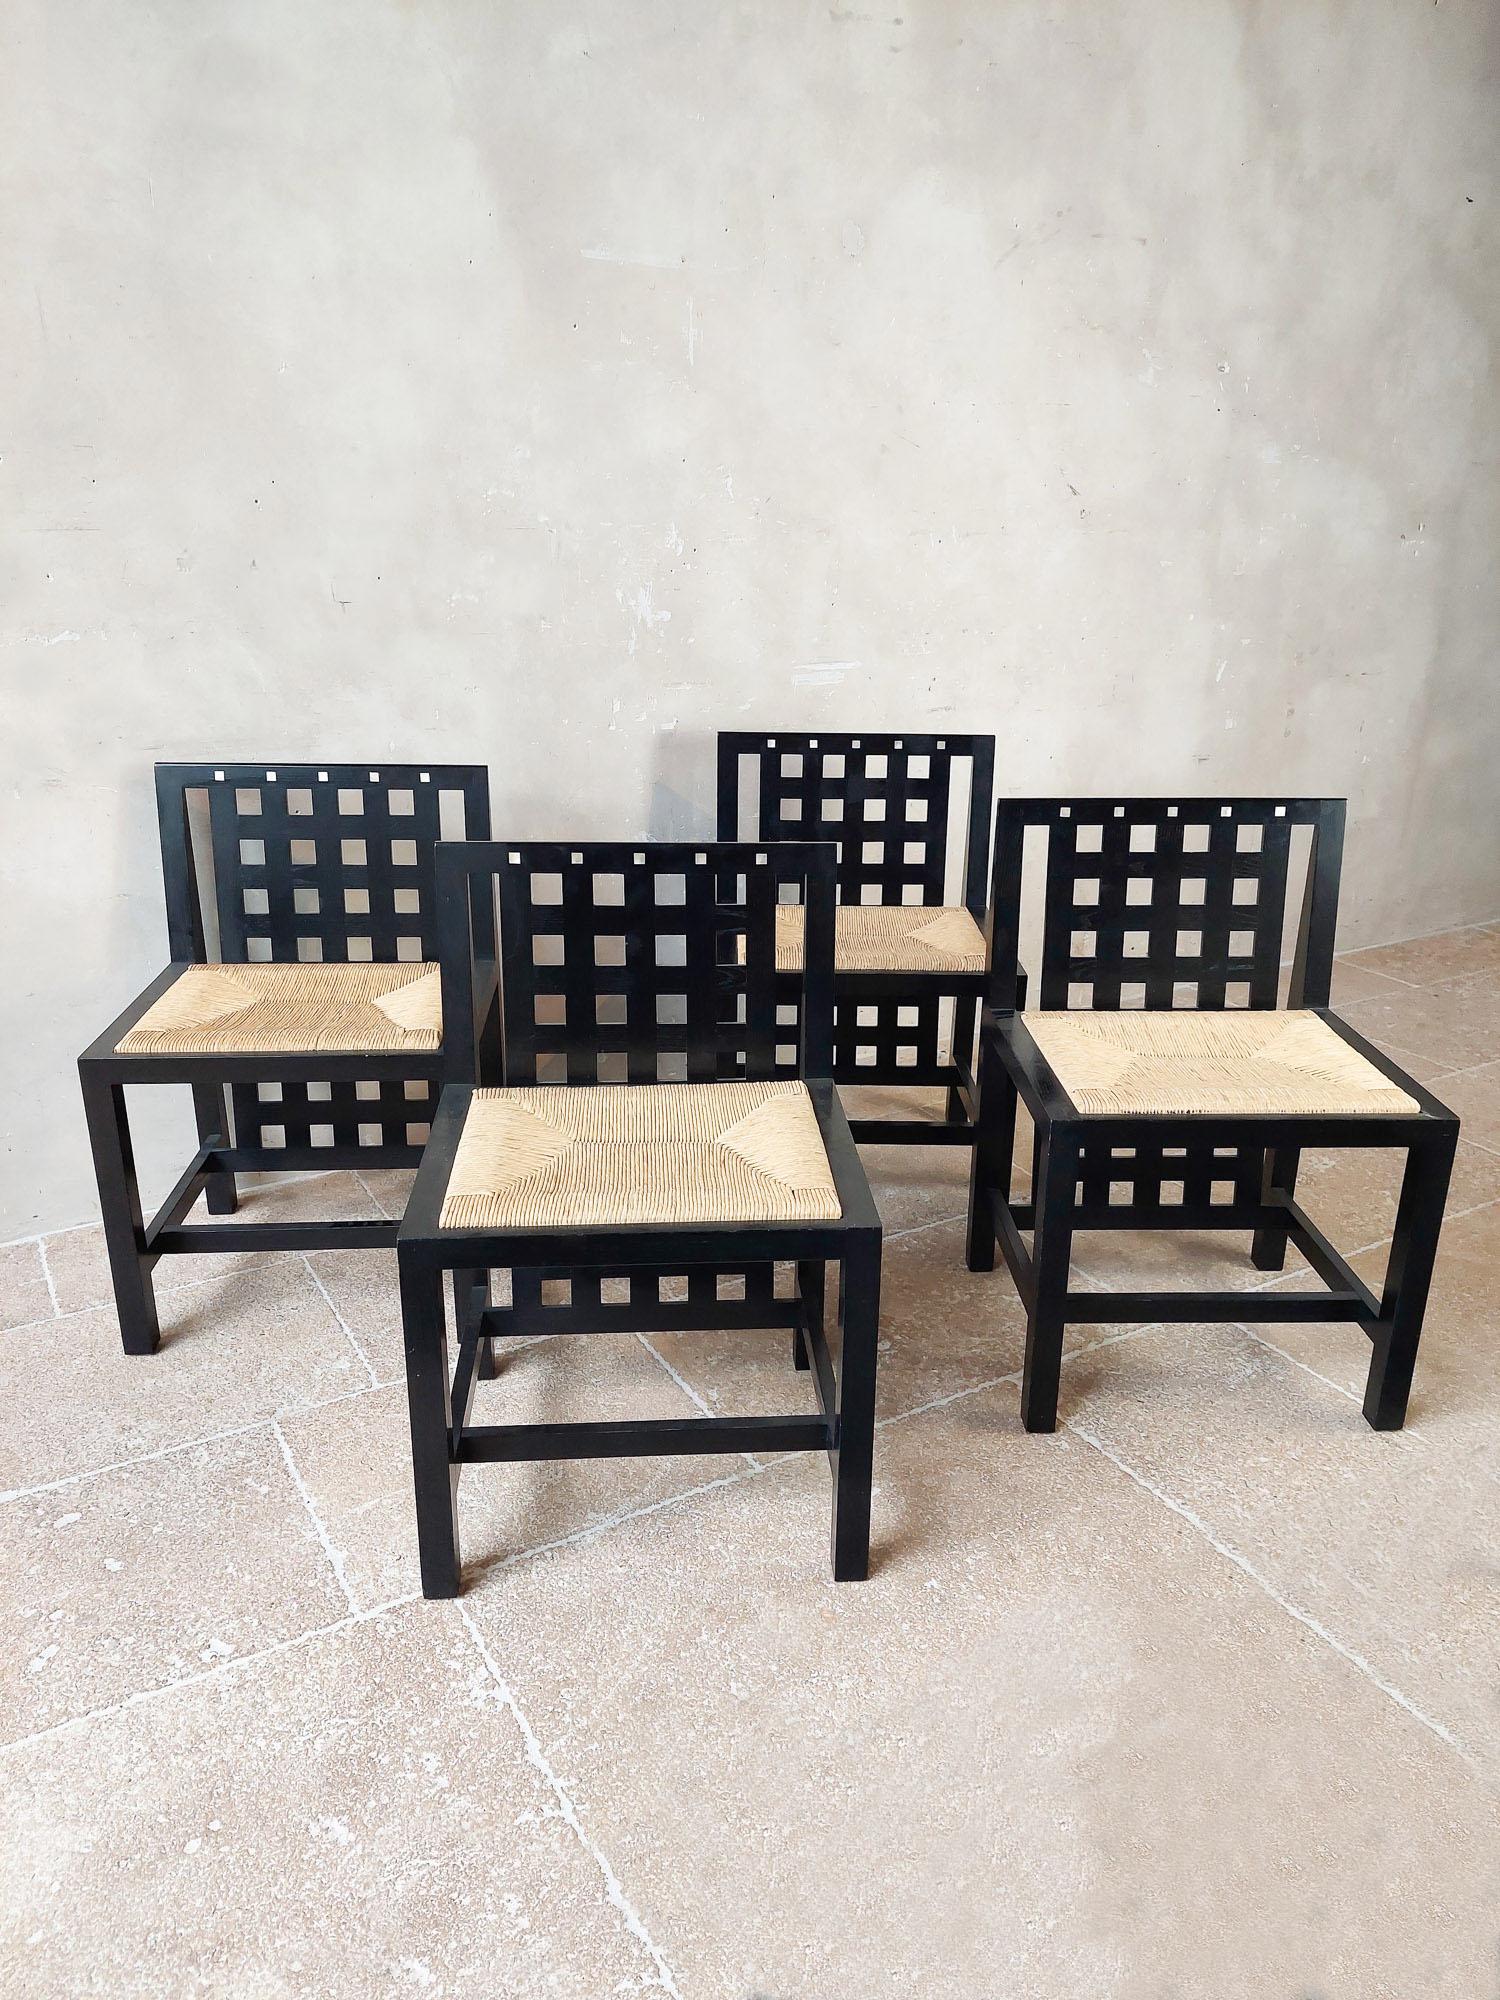 1970s Italian Black Oval Folding Table and Four Chairs designed by Mackintosh  For Sale 9